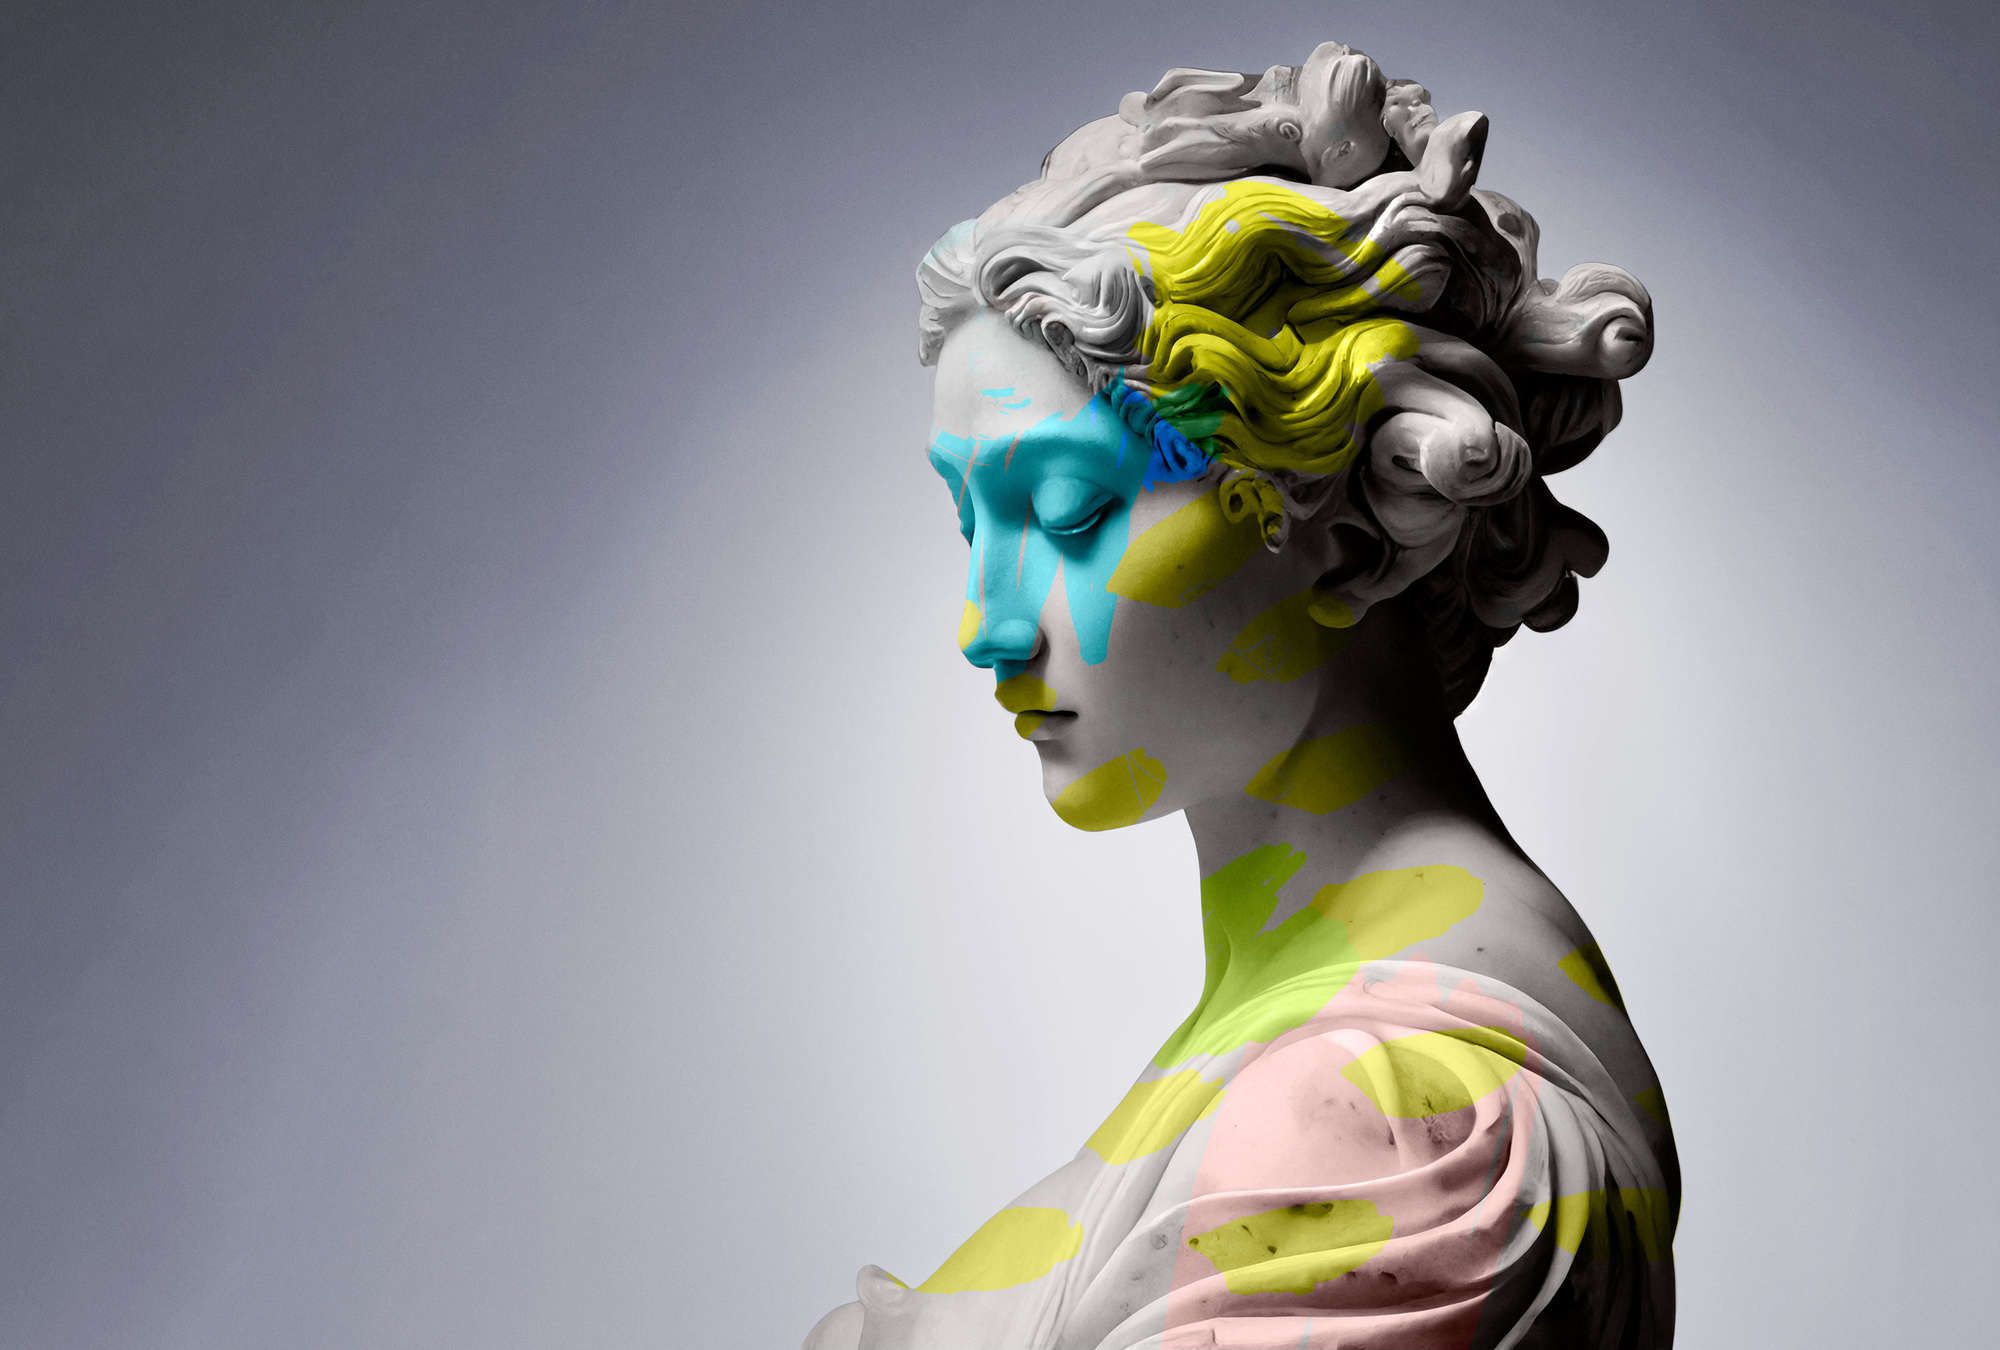             Photo wallpaper »clio« - female sculpture with colourful accents - Smooth, slightly pearlescent non-woven fabric
        